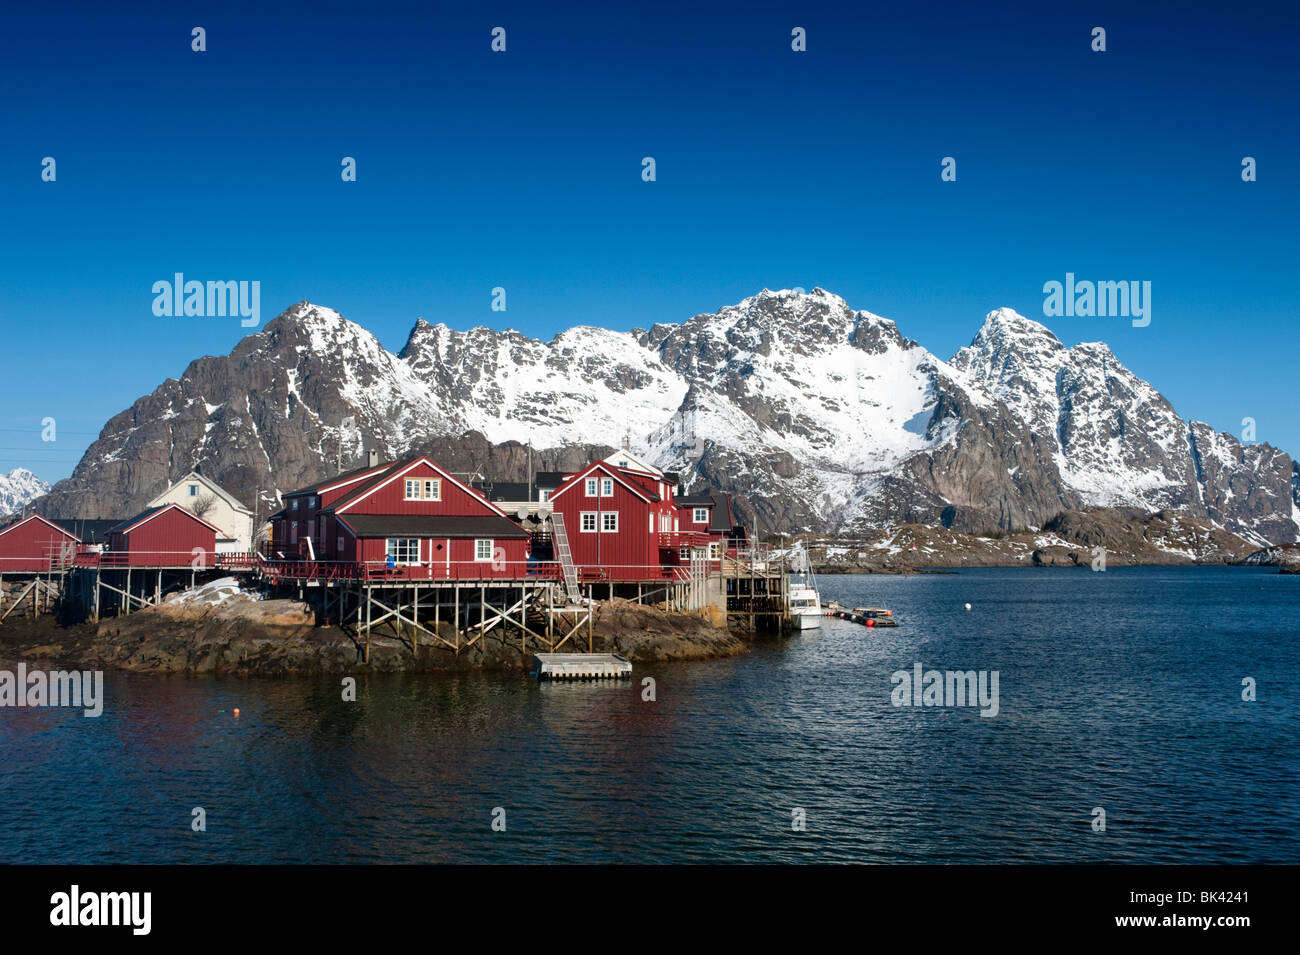 Traditional red wooden Rorbu fishermens` huts in village of Henningsvaer in Lofoten Islands in Norway Stock Photo